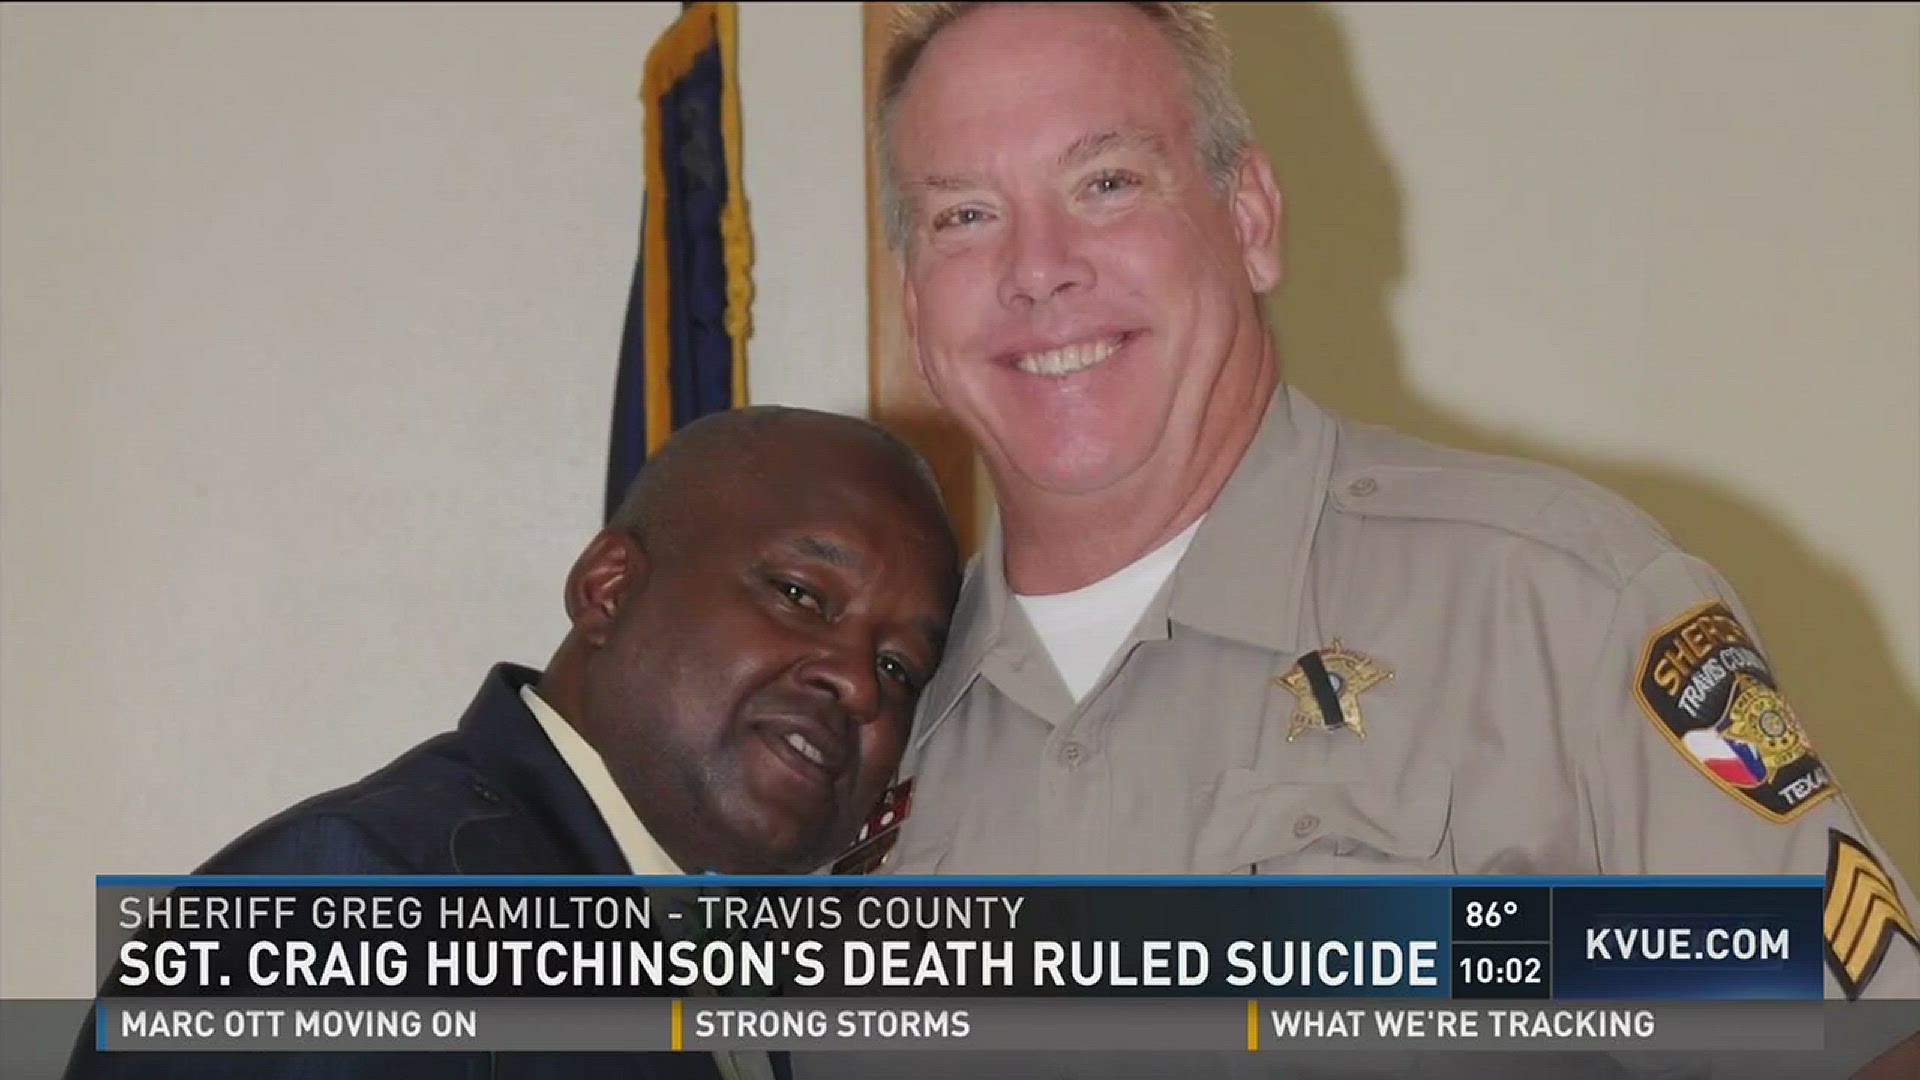 Sgt. Craig Hutchinson's death ruled suicide